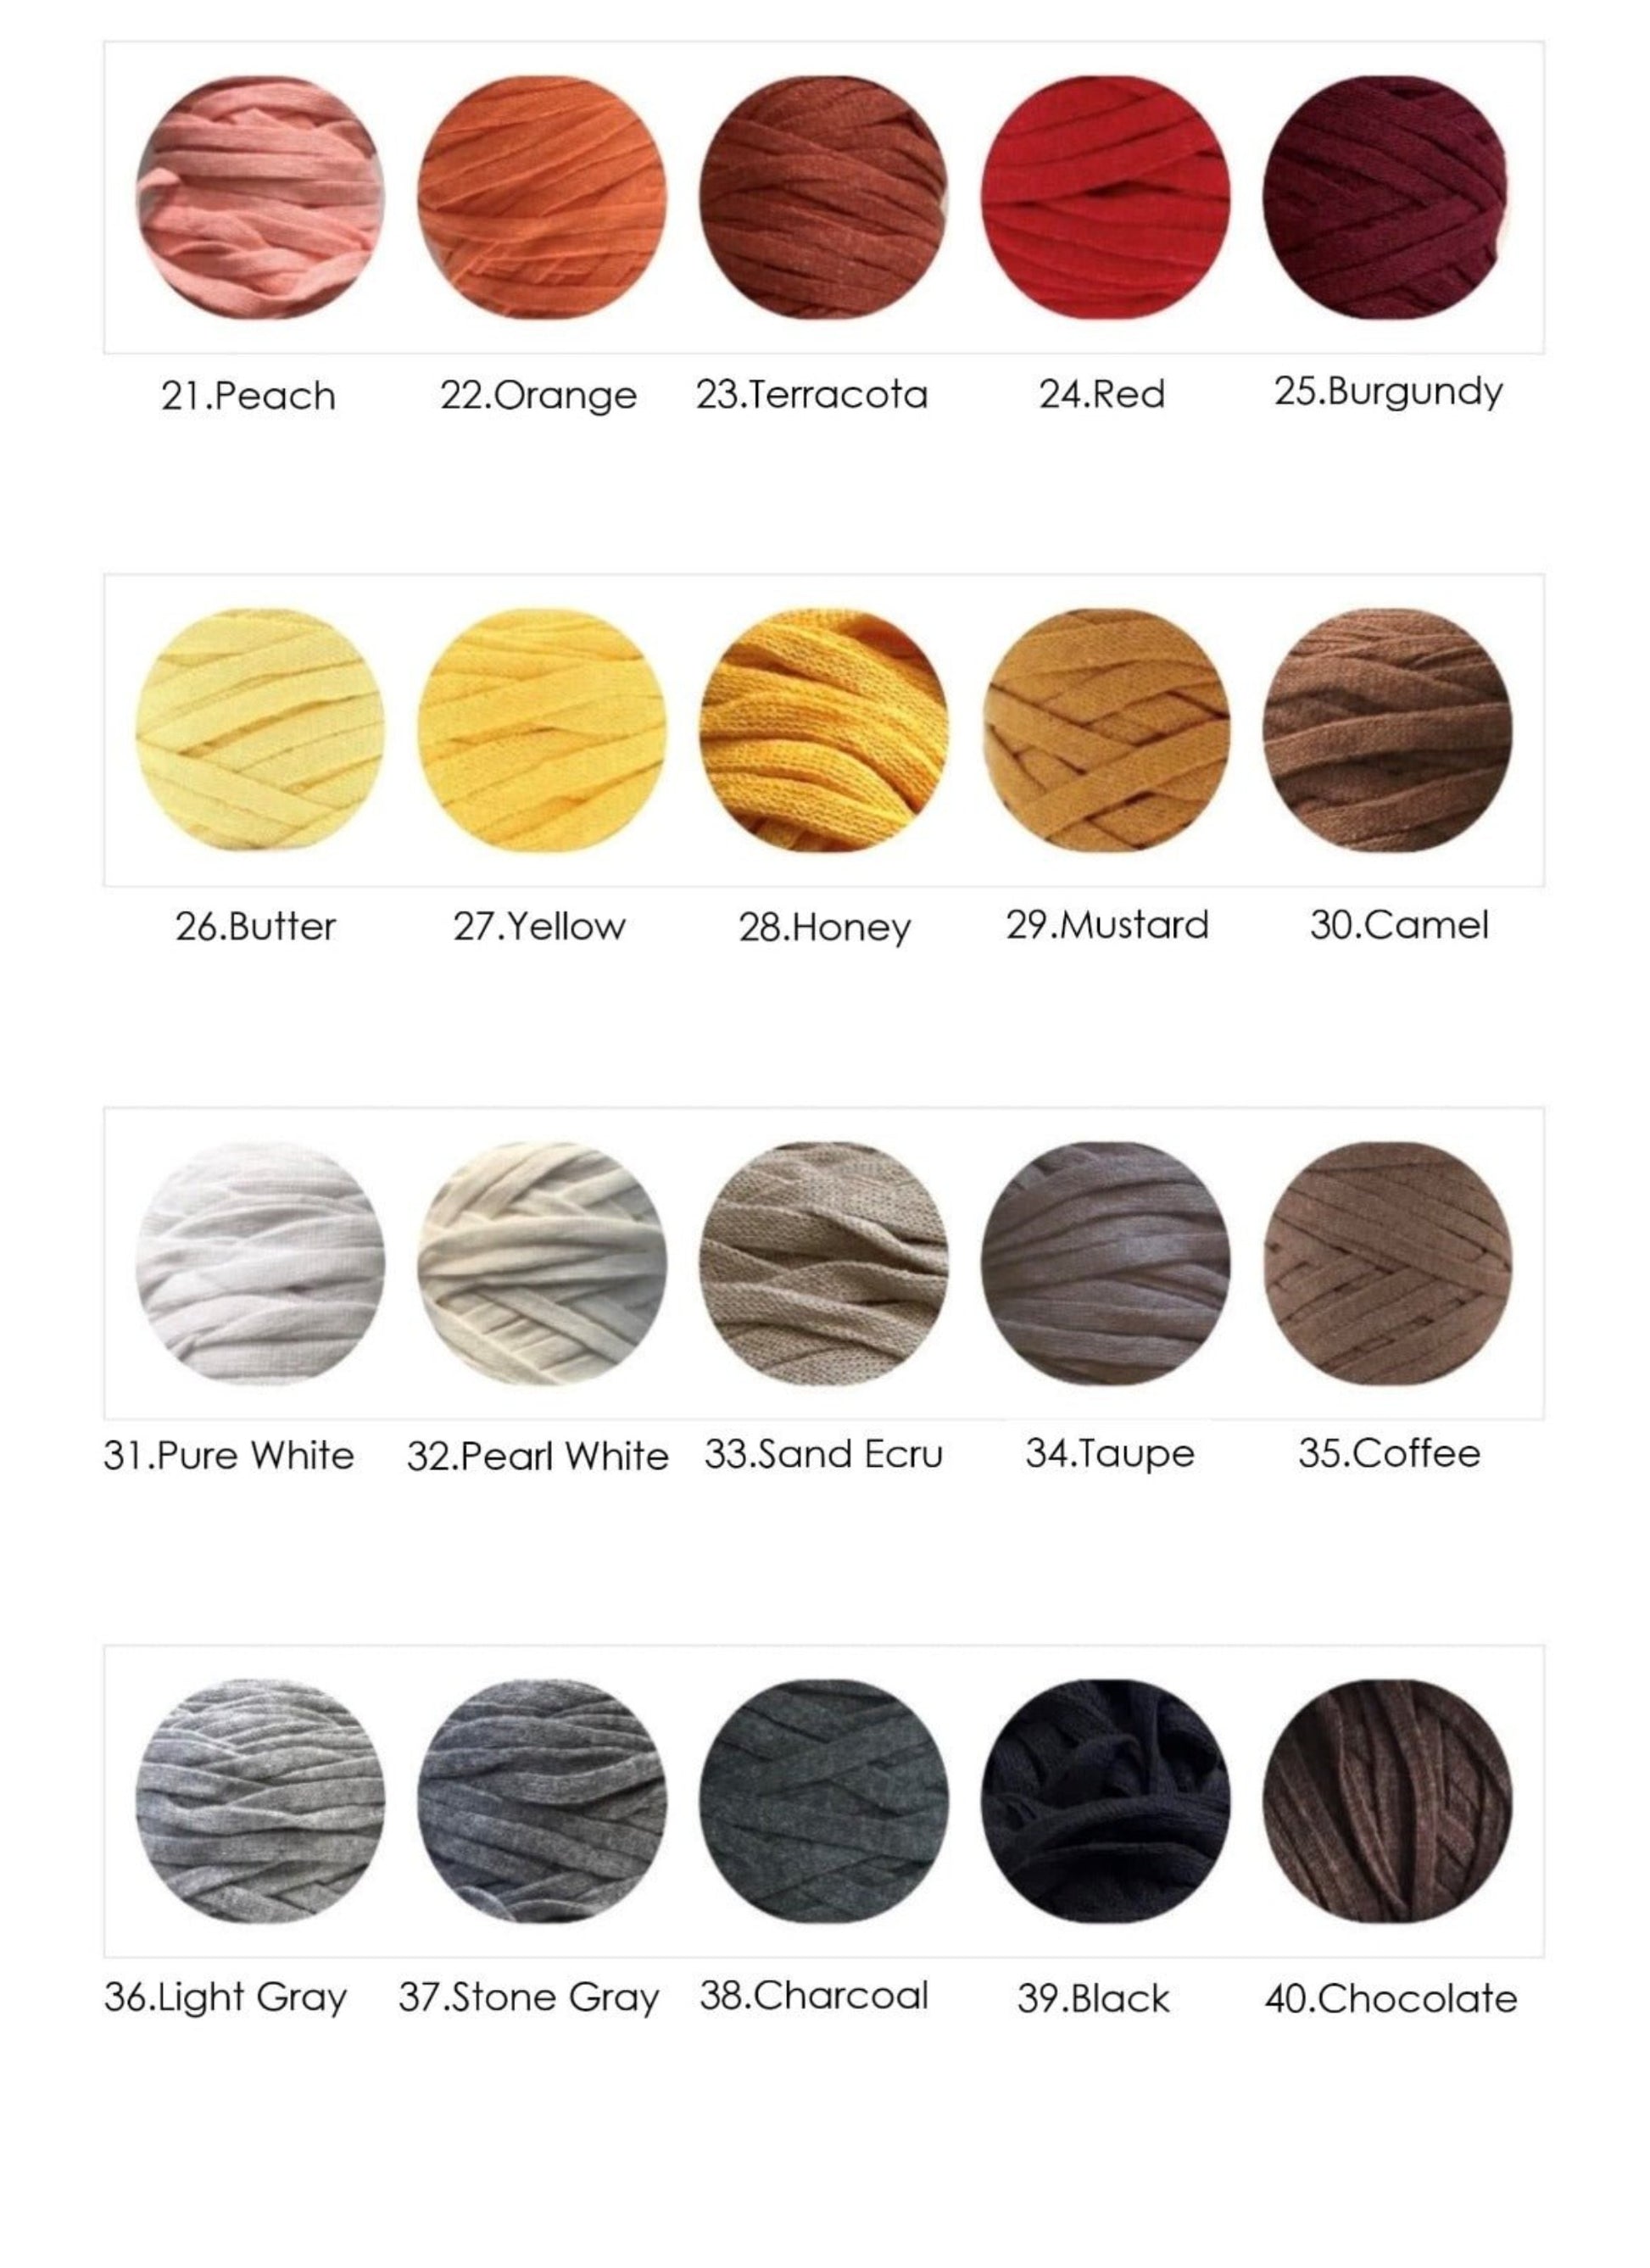 Color swatches representing the variety of square ottoman cover hues